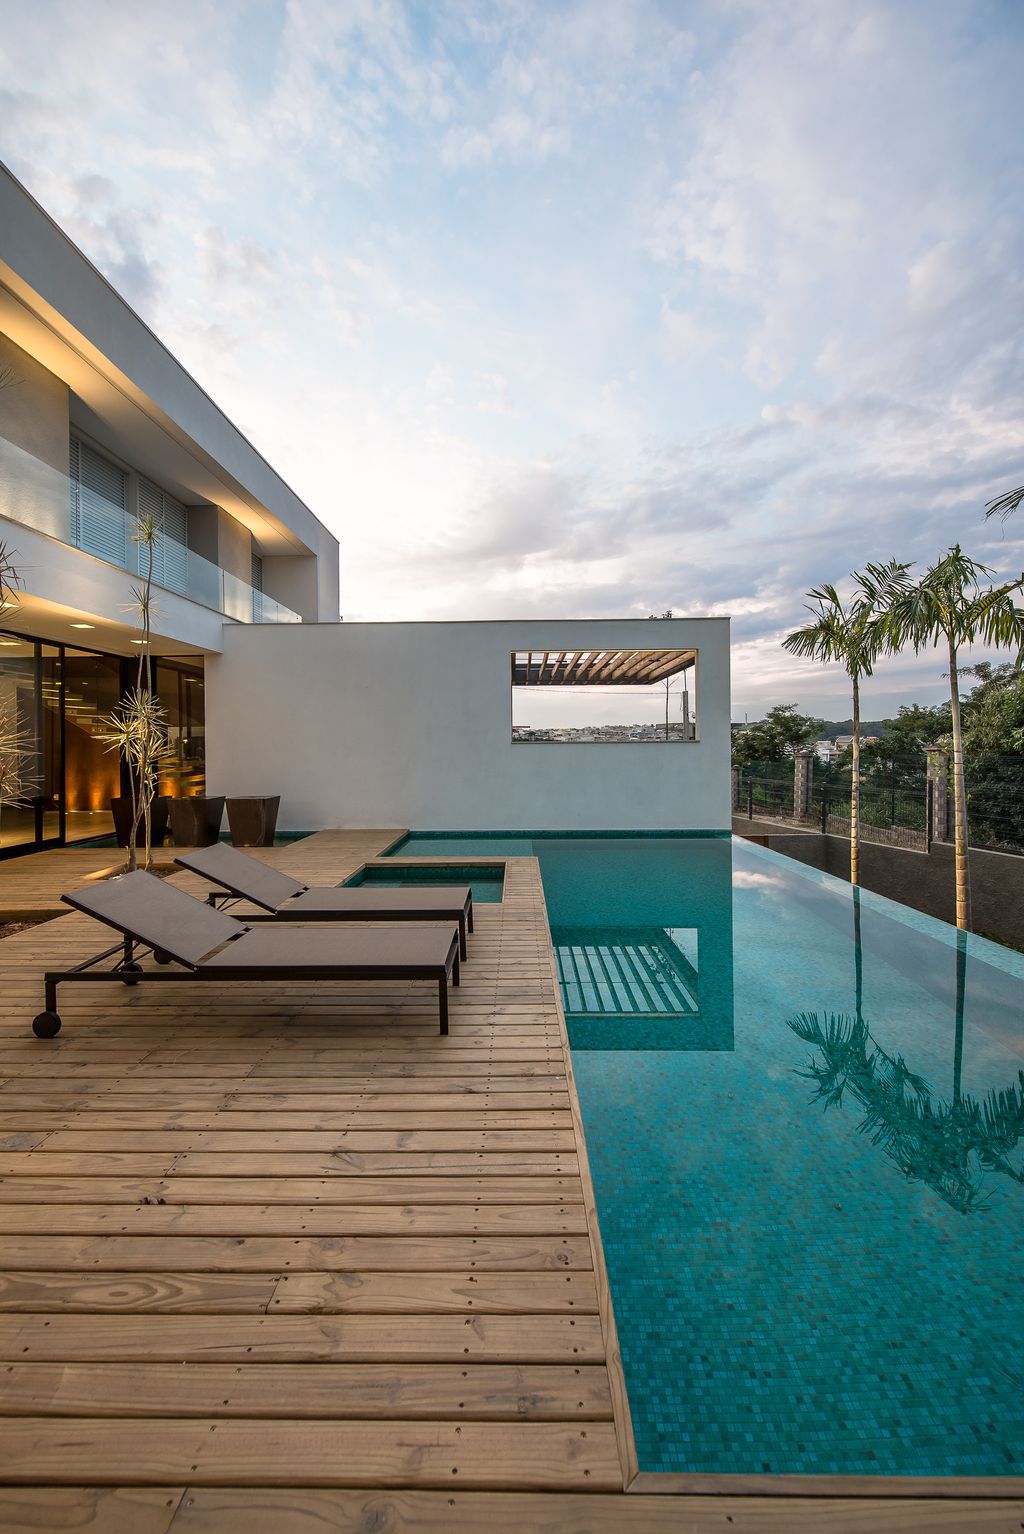 Boa Vista house, strong connection with landscape by Padovani Arquitetos